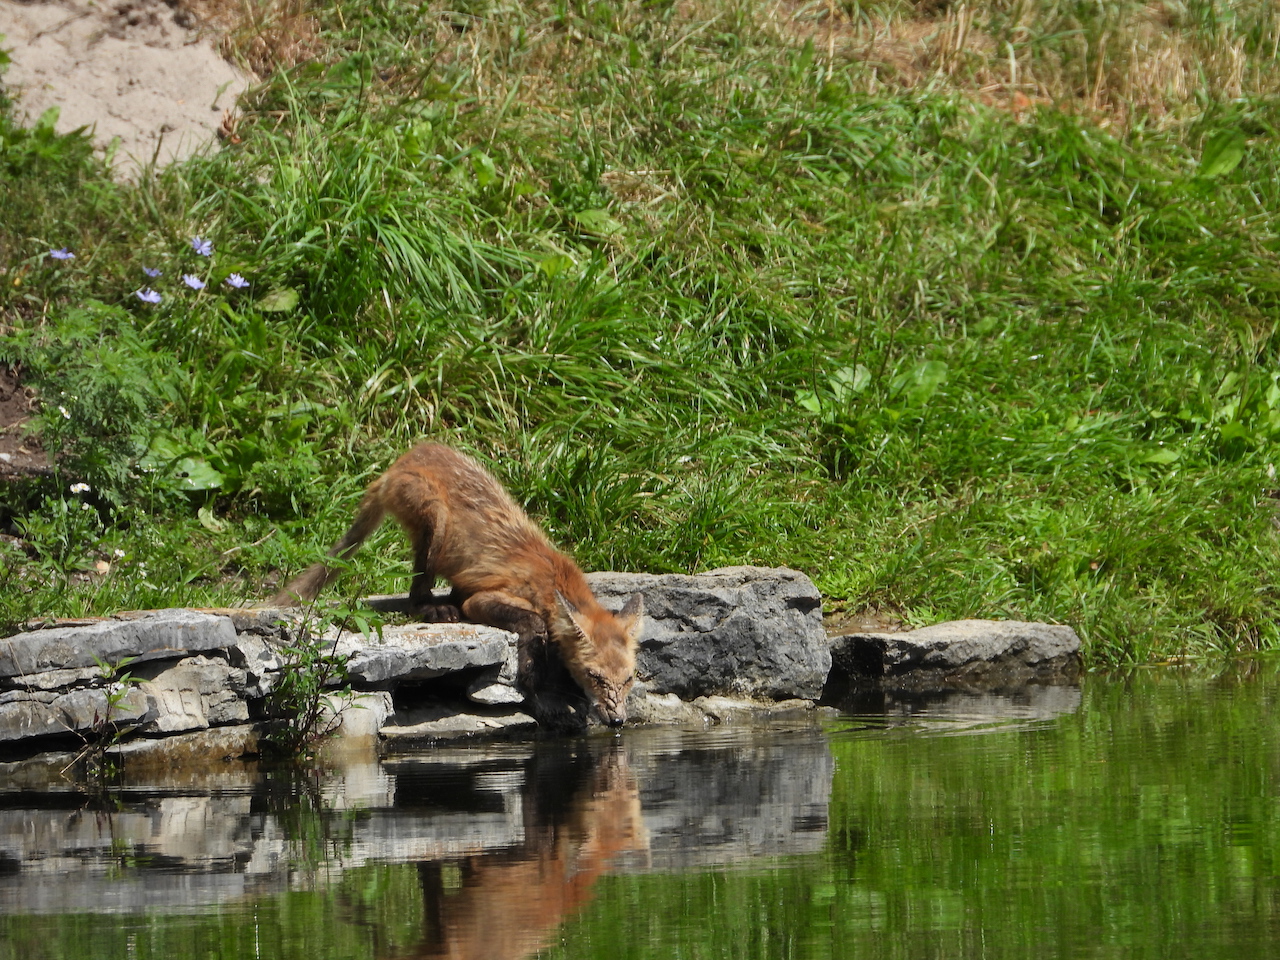 Honourable Mention in the Ruby category: “Thirsty Fox” by Astraia Doran of Riverview Park & Zoo.